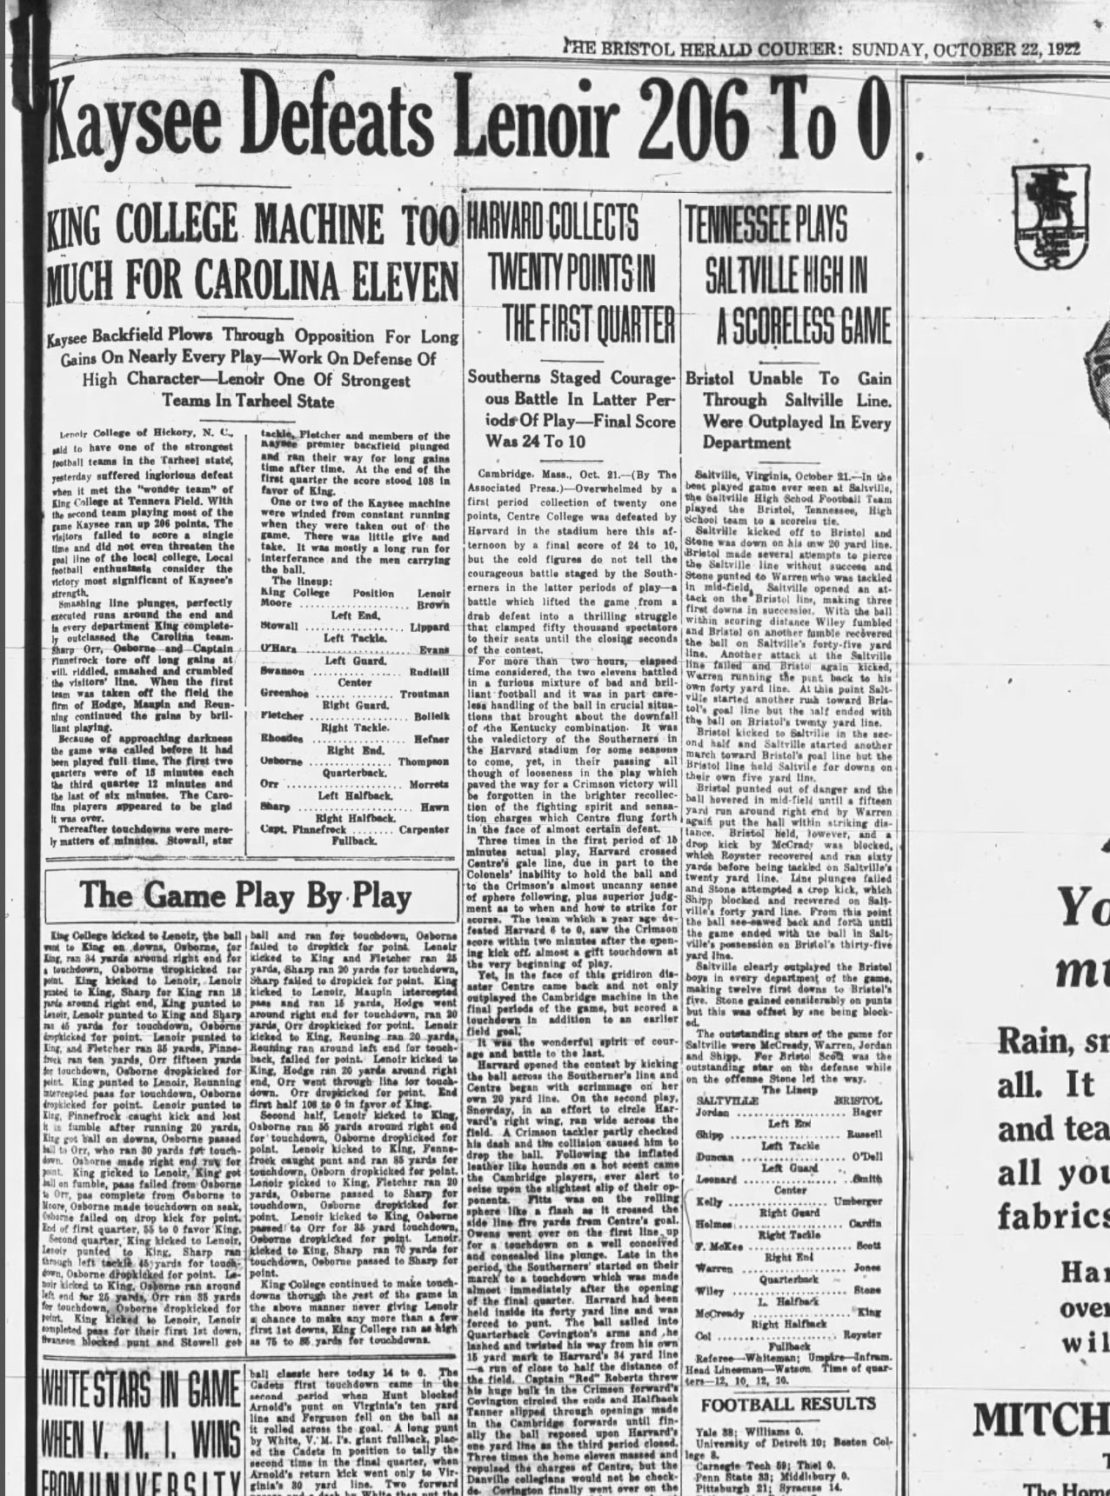 This Bristol Herald Courier story was picked up by the Associated Press (AP) and published nationwide on Oct. 22, 1922. The AP headline called King's defeat of Lenoir College the 